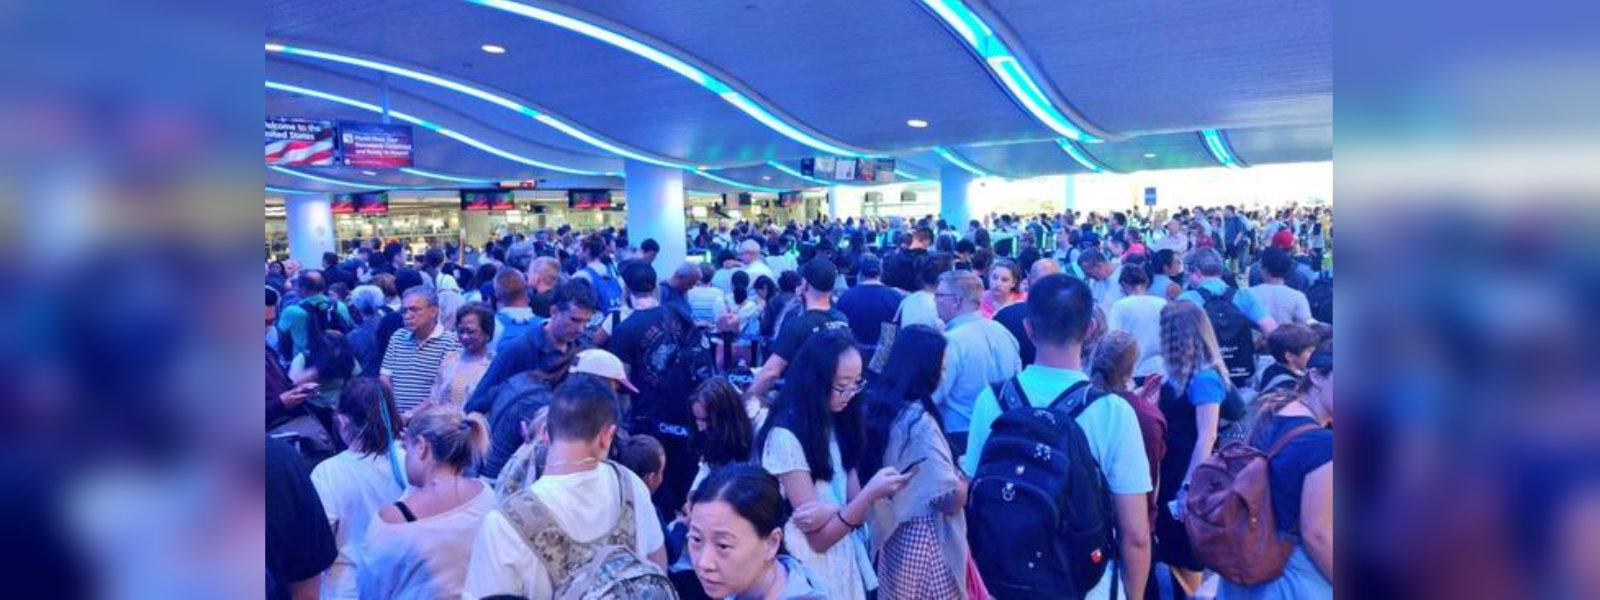 Computer outage causes delays in U.S airports